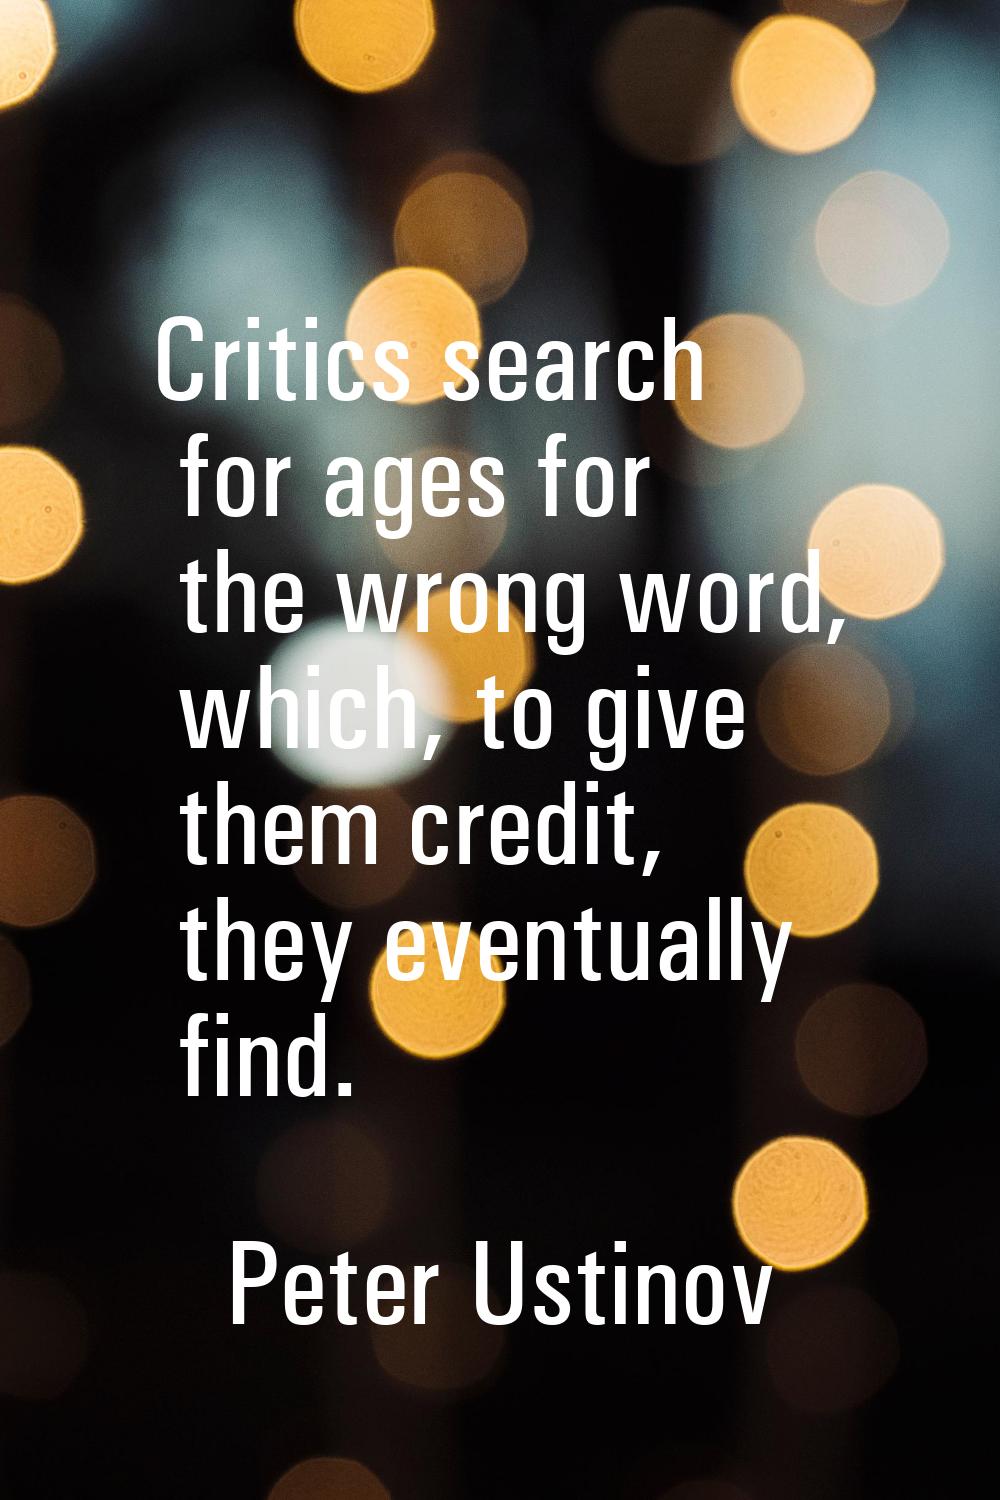 Critics search for ages for the wrong word, which, to give them credit, they eventually find.